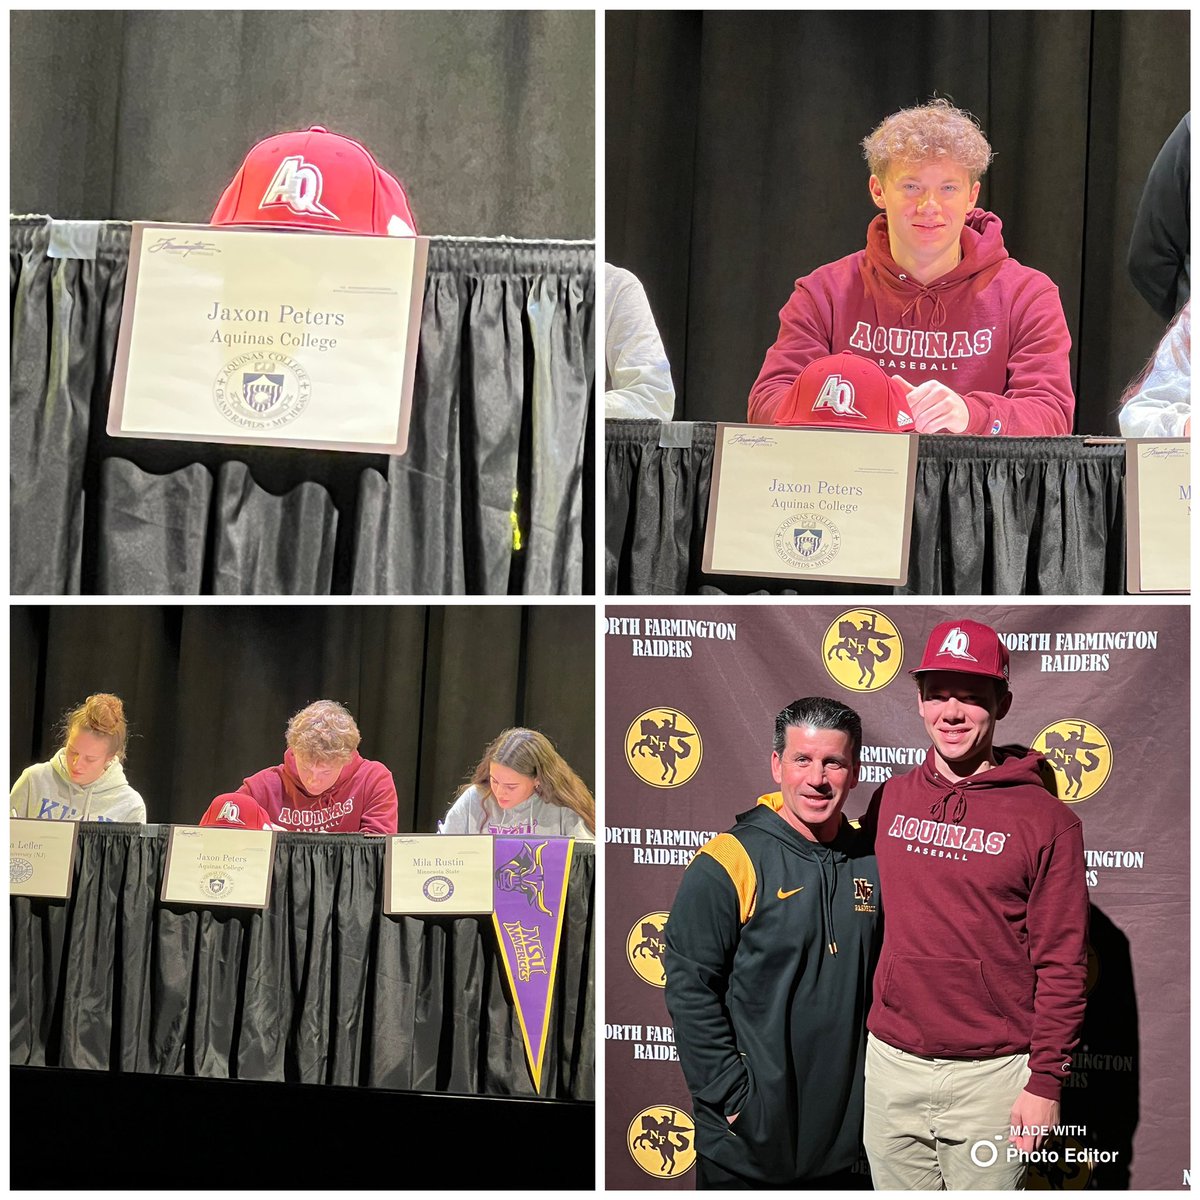 It’s official, North Farmington signing day. @jaxonpeters11 @NFHSRaiders_BSB @coachmalky @clamange @AQBaseball